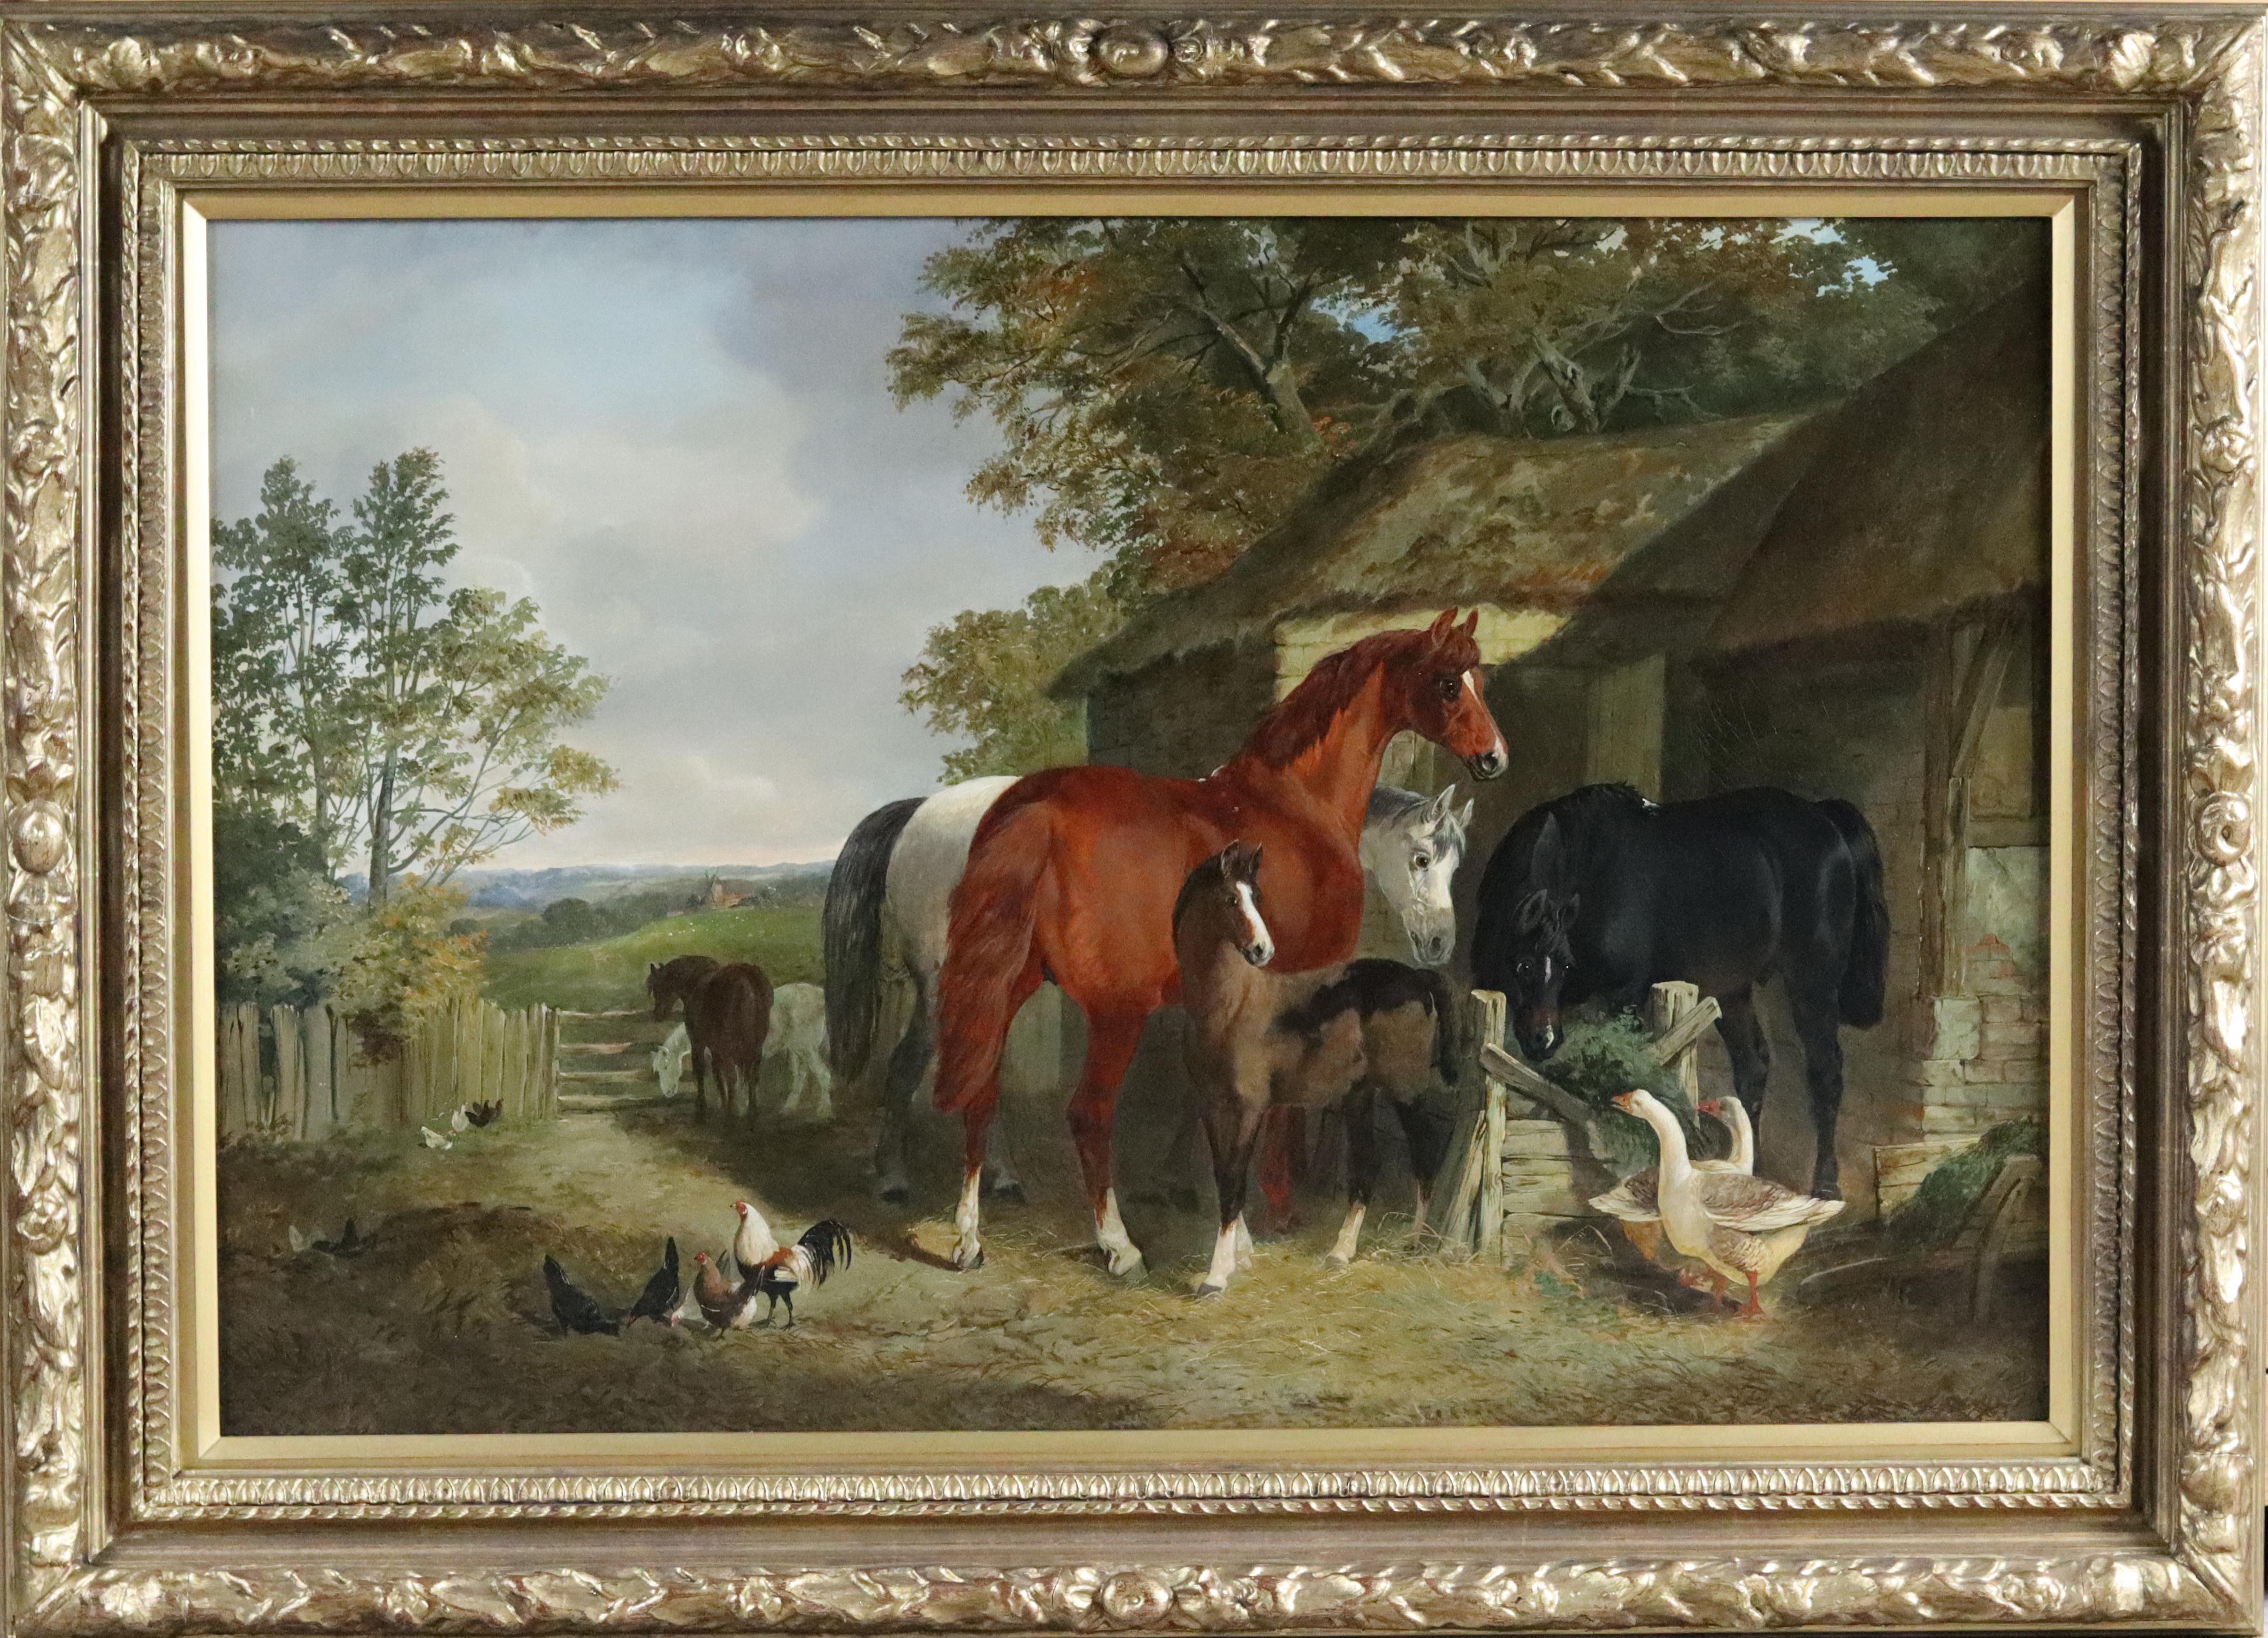 A Farmyard Scene with Horses, Geese and Chickens - Painting by John Frederick Herring Jr.